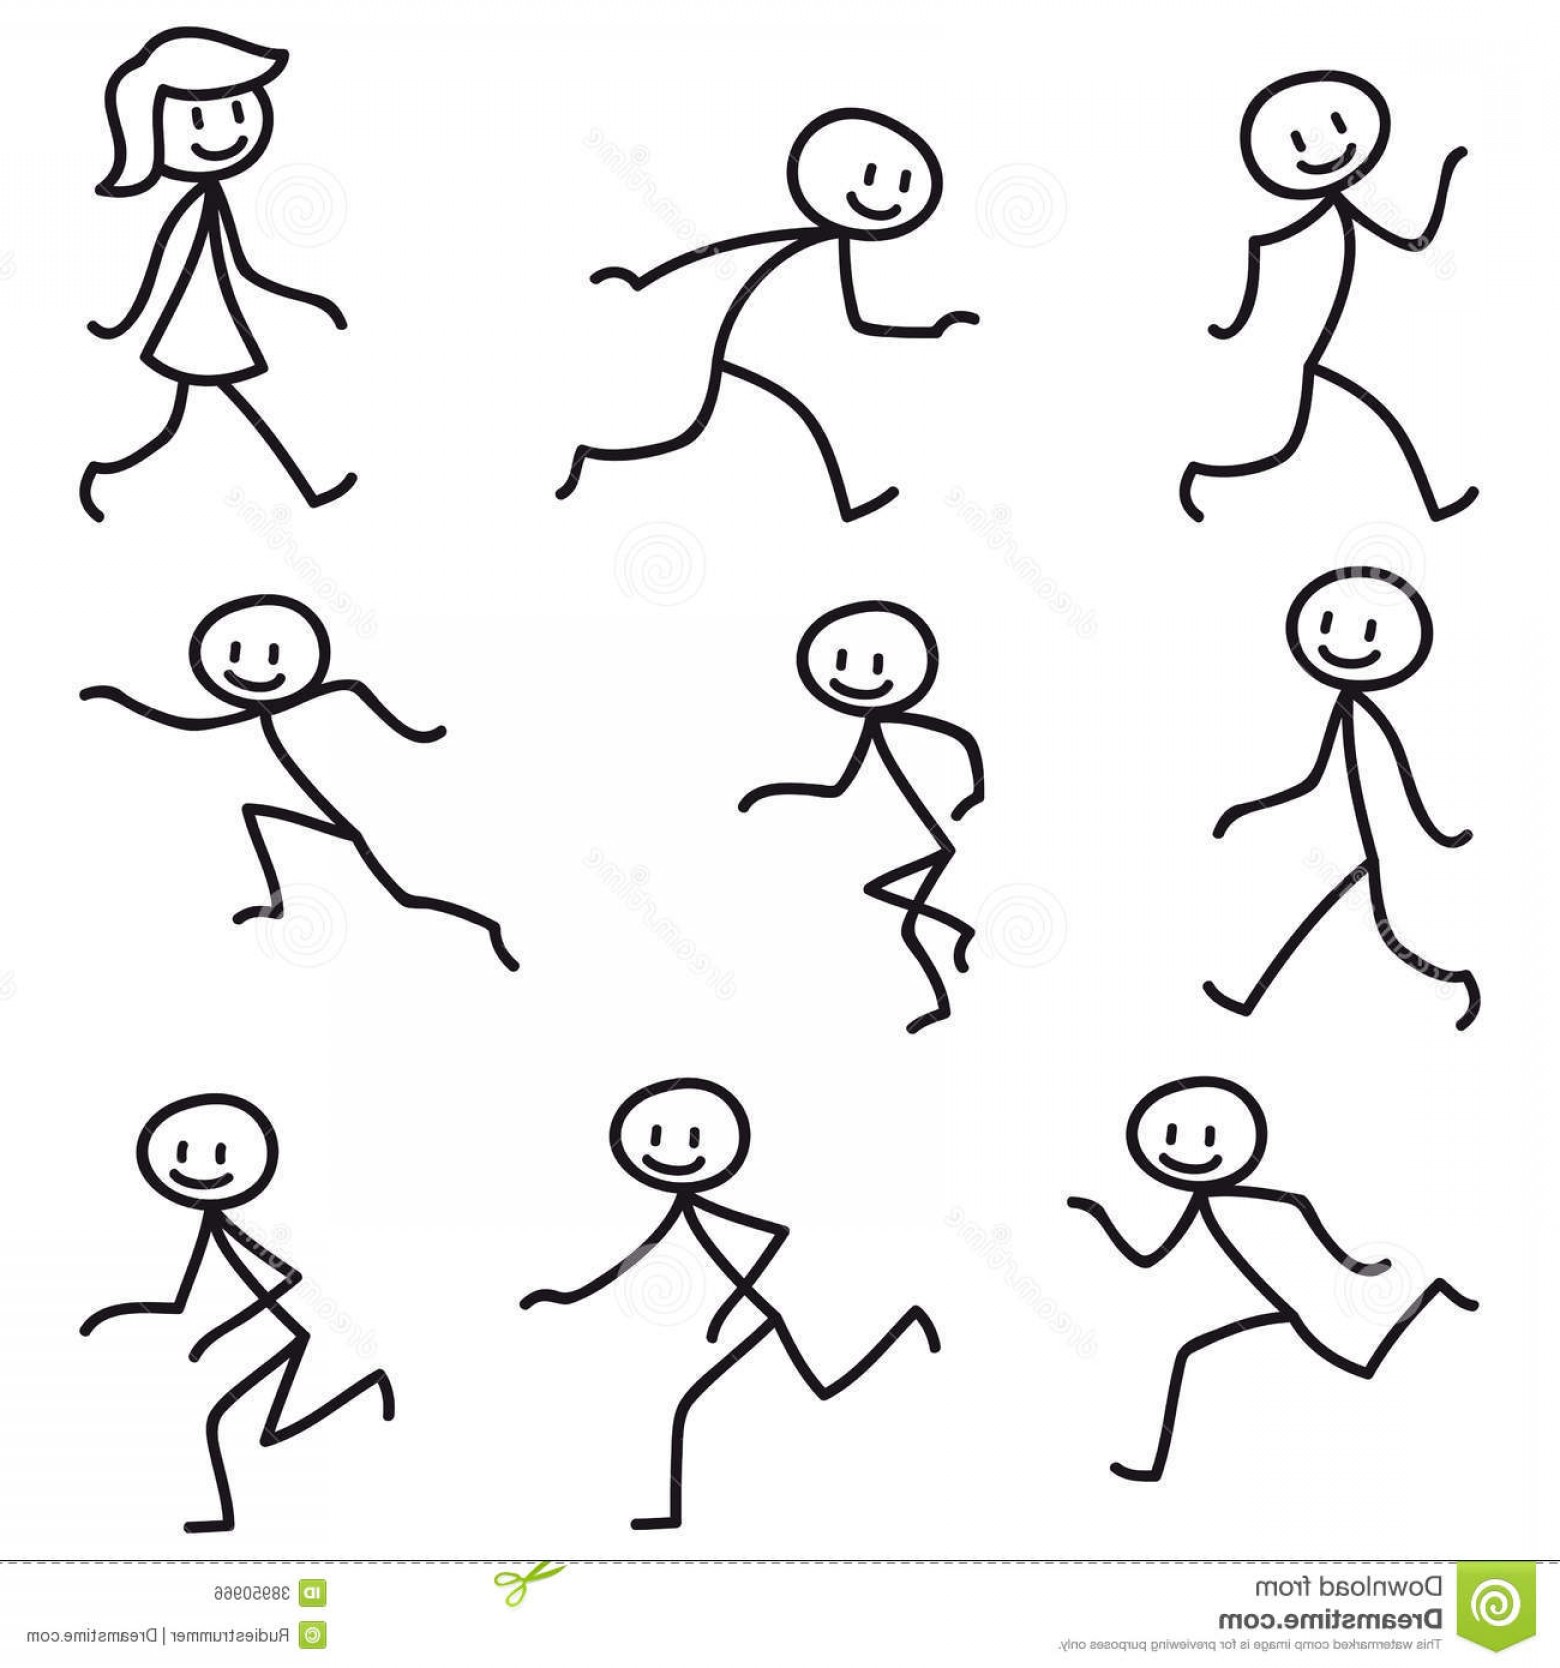 Stick figures humping